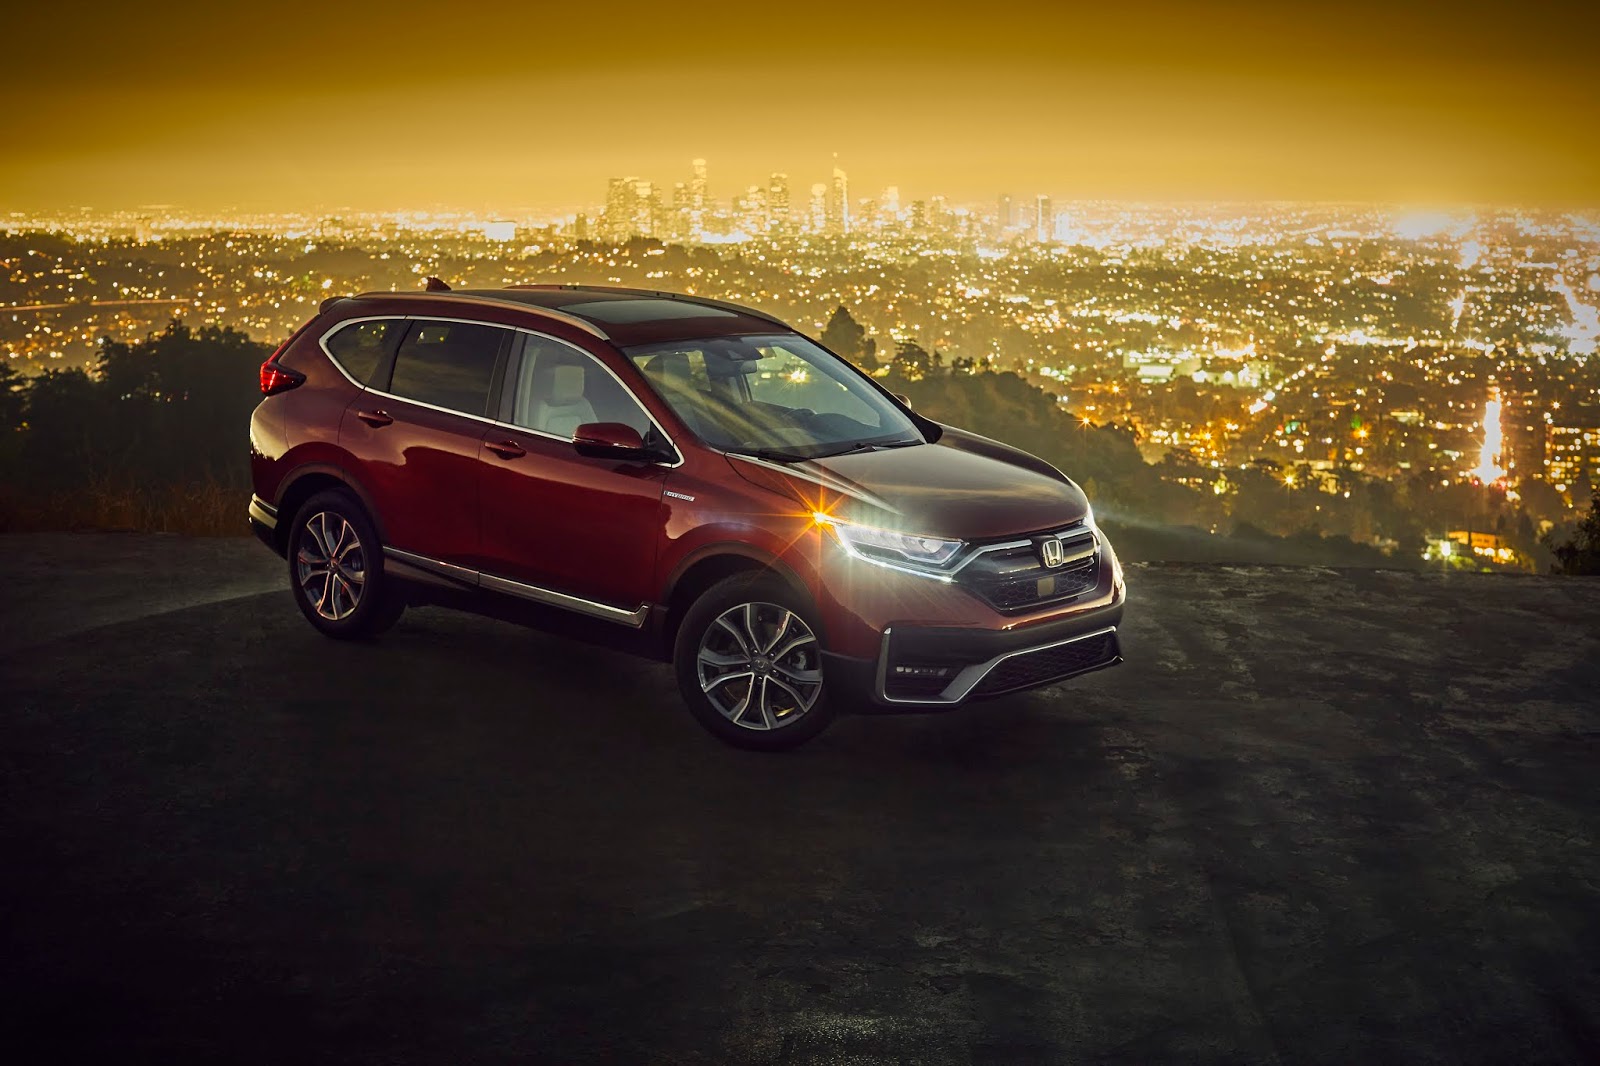 2020 Honda CR-V Hybrid Arriving at Dealerships as the Most Powerful